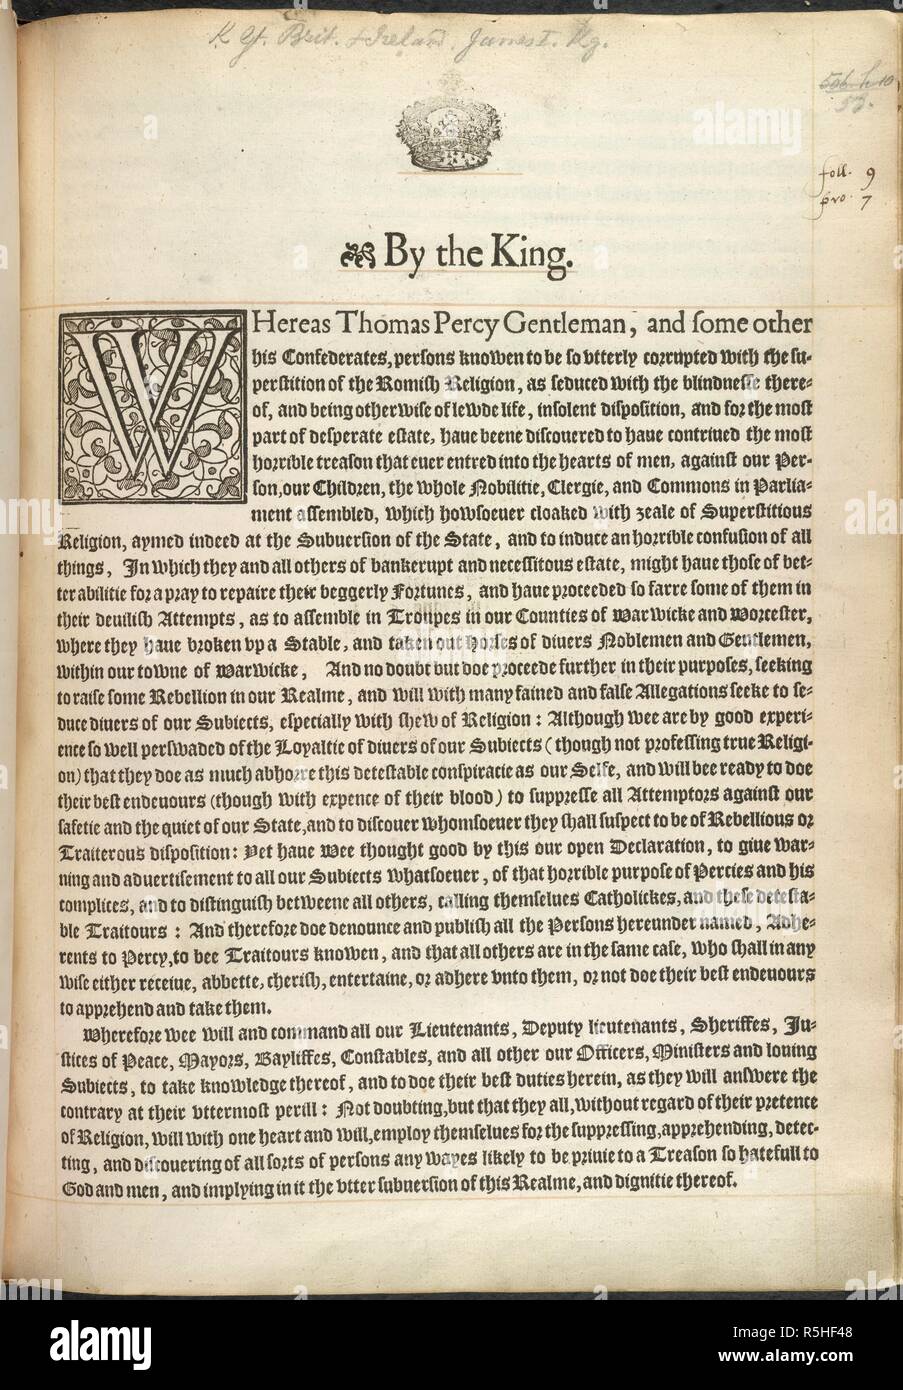 A Proclamation of 1605. By the King. [A Proclamation for the apprehension. R. Barker: London, 1605. A Proclamation for the apprehension of Thomas Percy, R. Catesby, A. Rookwood, T. Winter, E. Grant, J. Wright, C. Wright, R. Ashfield, in connection with the Gunpowder Plot. 7 Nov. 1605.  Image taken from By the King. [A Proclamation for the apprehension of Thomas Percy, R. Catesby, A. Rookwood, T. Winter, E. Grant, J. Wright, C. Wright, R. Ashfield, in connection with the Gunpowder Plot. 7 Nov. 1605.]  Originally published/produced in R. Barker: London, 1605. . Source: C.112.h.1.(58), 1. Languag Stock Photo